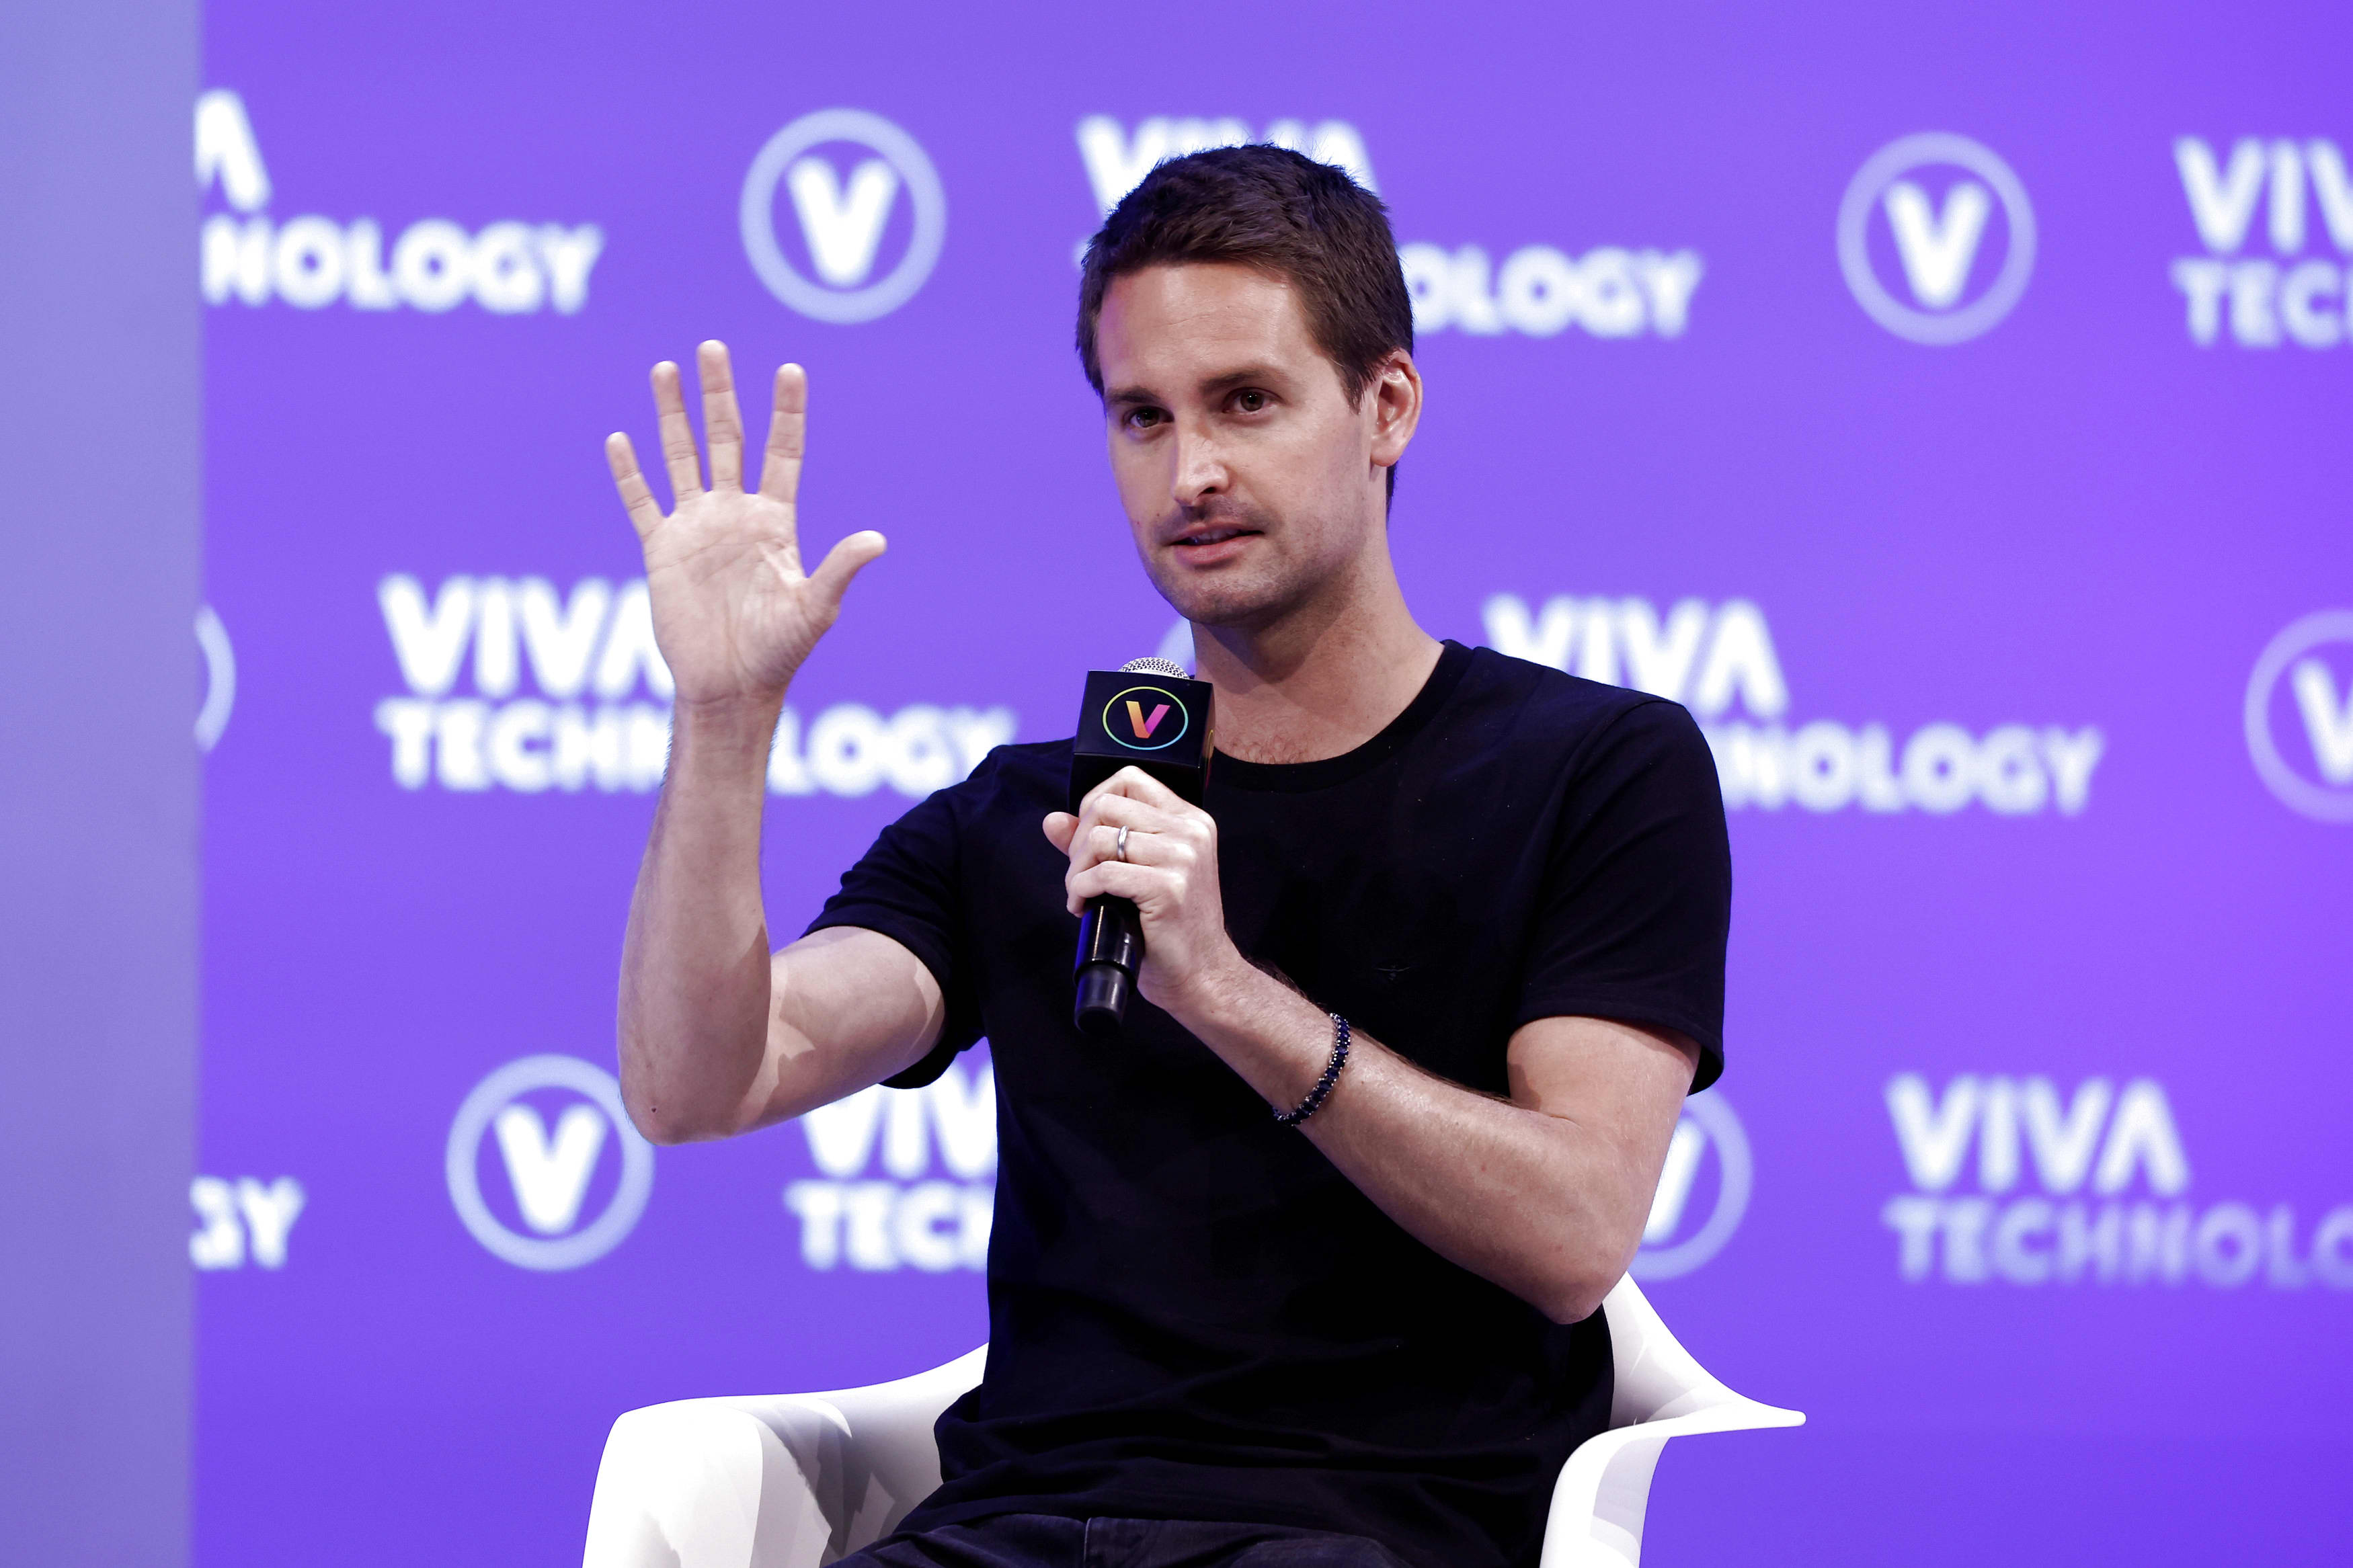 Snap Shares Plummet After Q4 Earnings Report - The New York Times